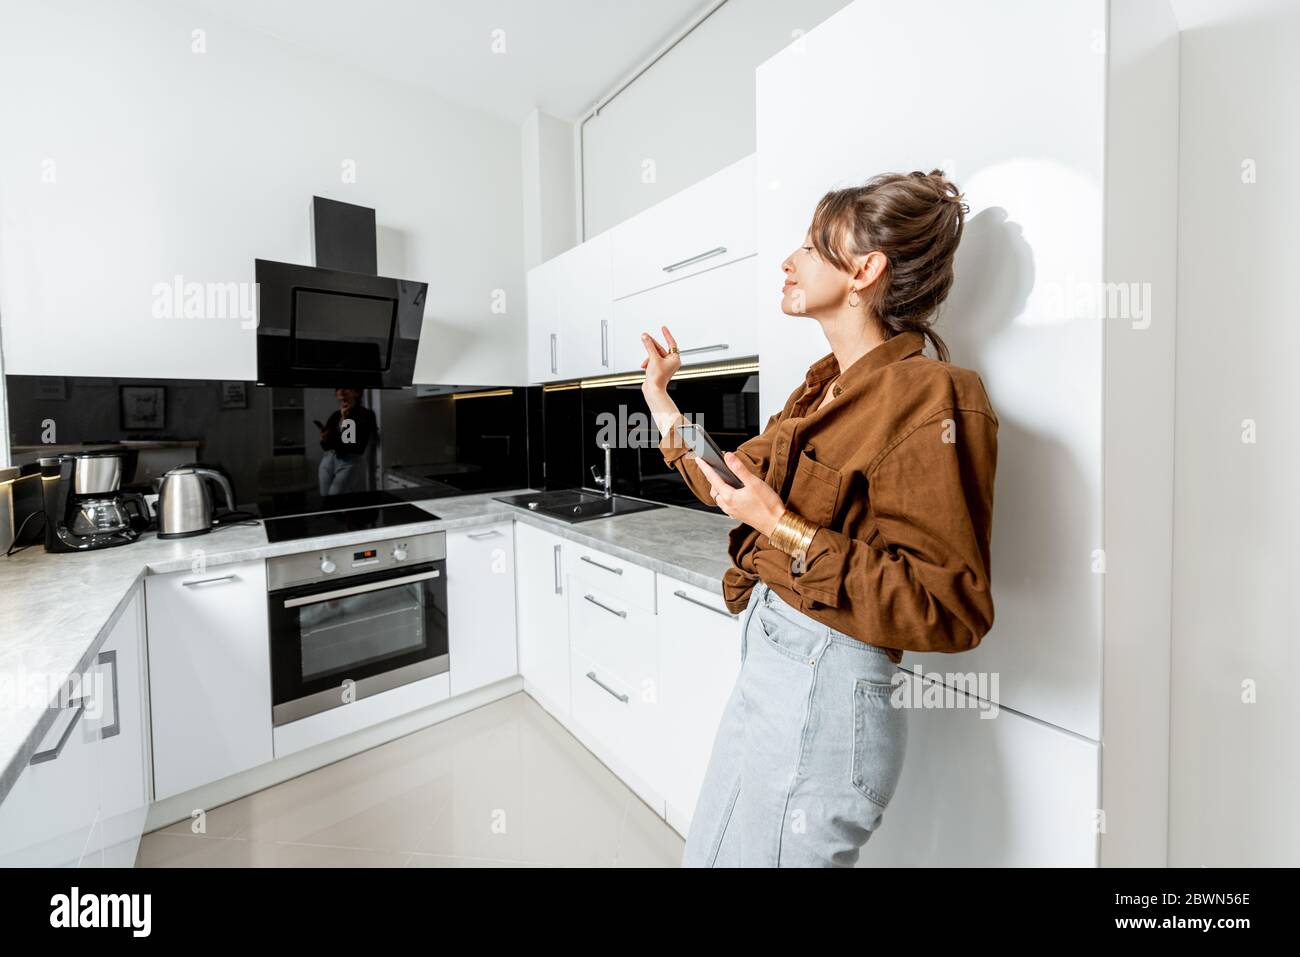 Young woman controlling kitchen appliances with mobile phone and voice commands, wide interior view. Smart home concept Stock Photo